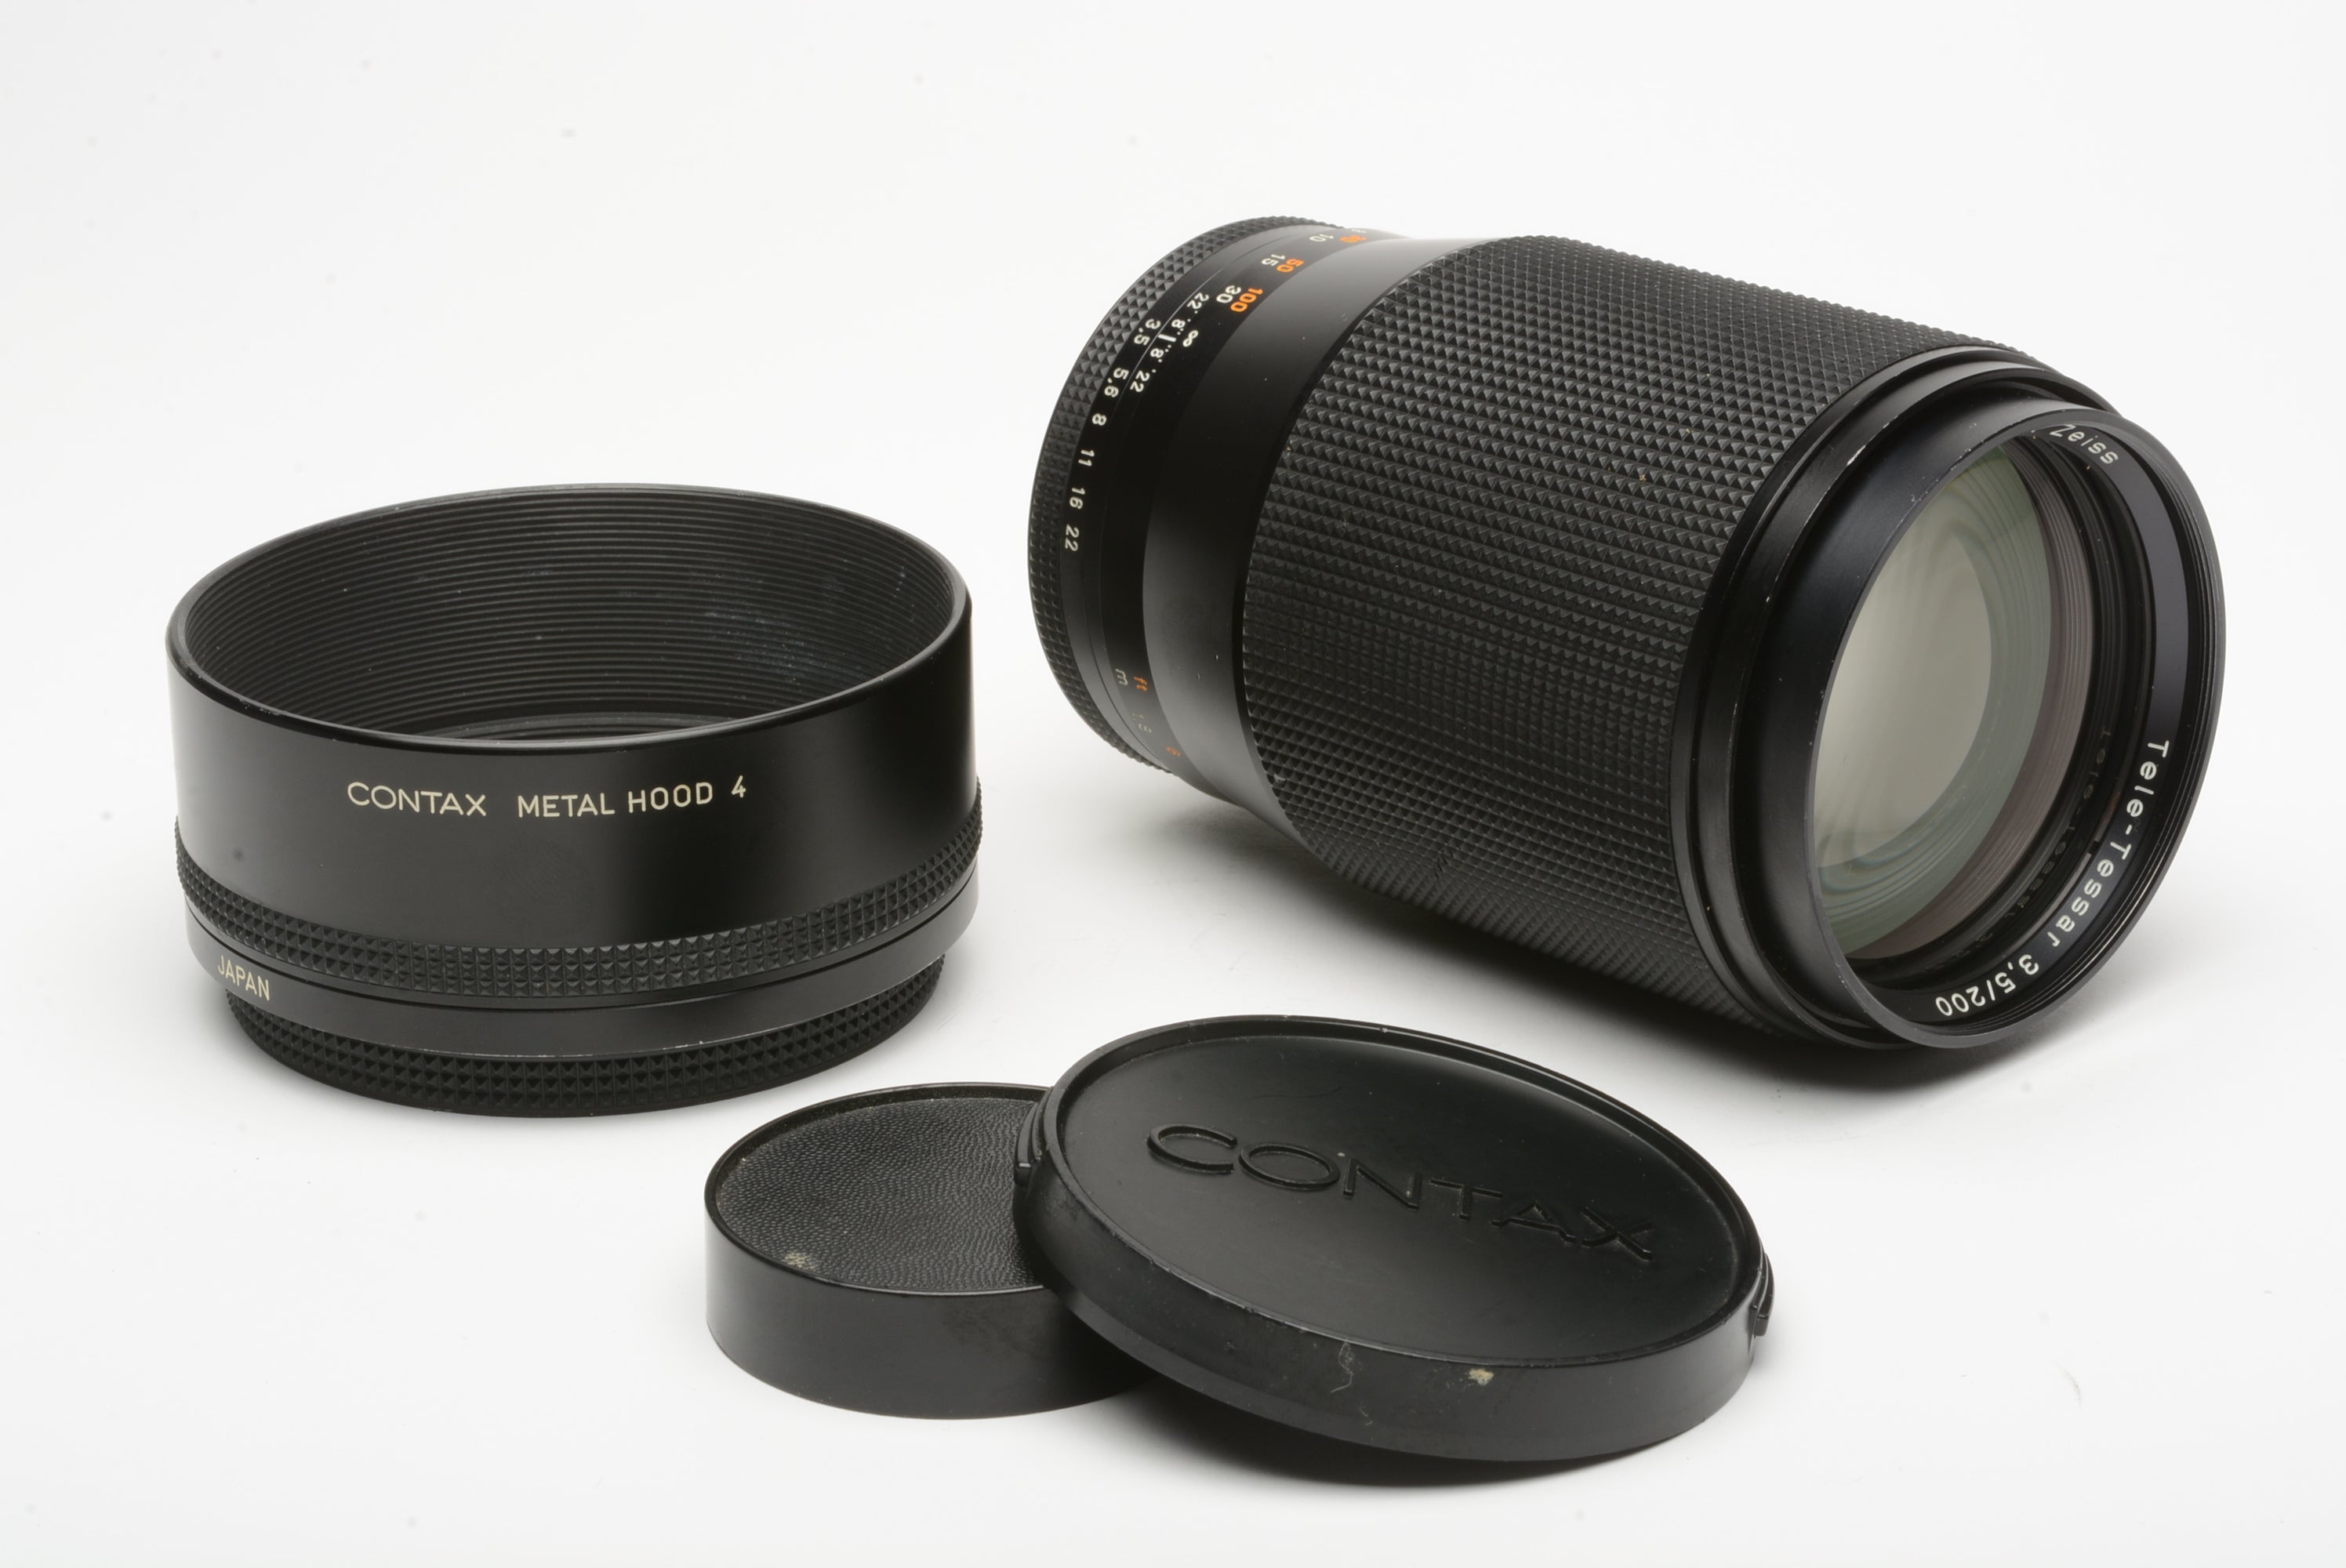 Contax Tele-Tessar 200mm f3.5 AEG T* lens for Contax/Yashica mount 